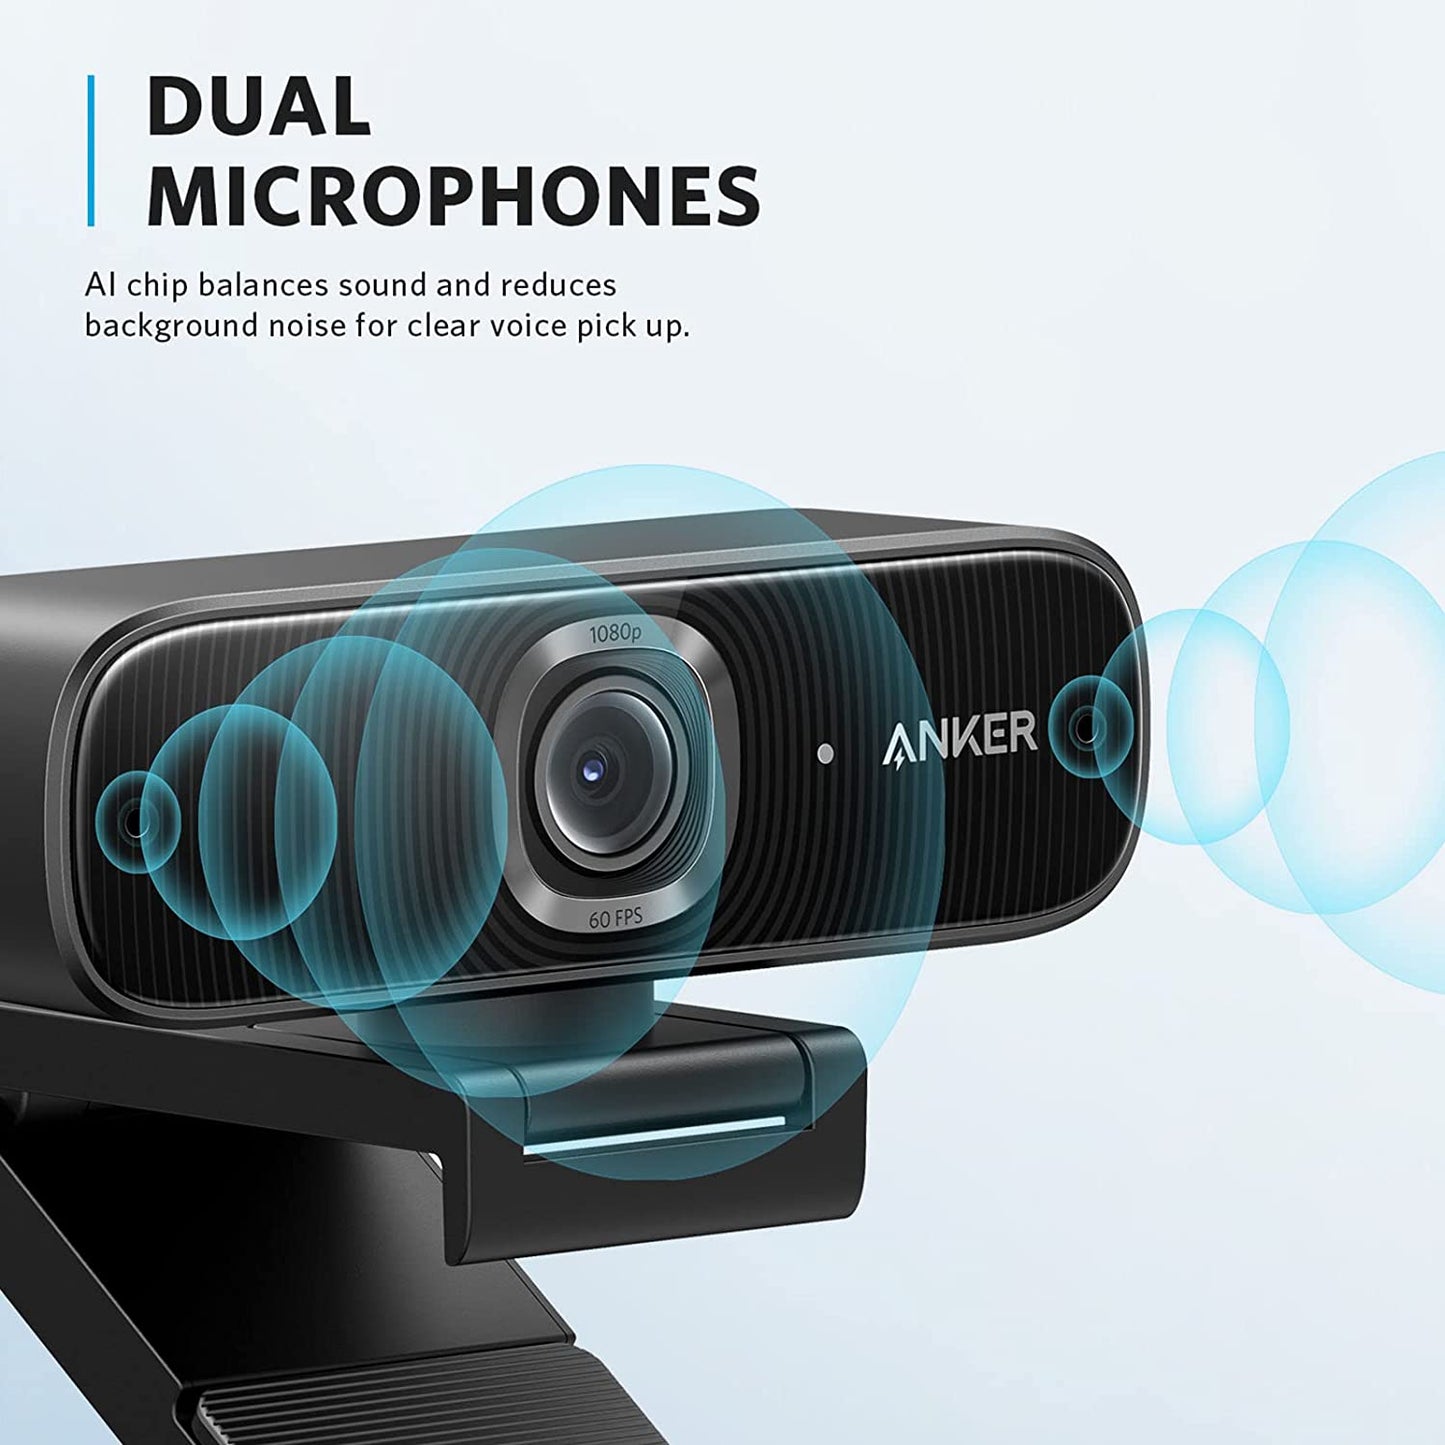 Anker PowerConf C300 Smart Full HD Webcam, AI-Powered Framing & Autofocus, 1080p Webcam with Noise-Cancelling Microphones, Adjustable FoV, HDR, 60 FPS, Low-Light Correction, Zoom Certified - Hatke